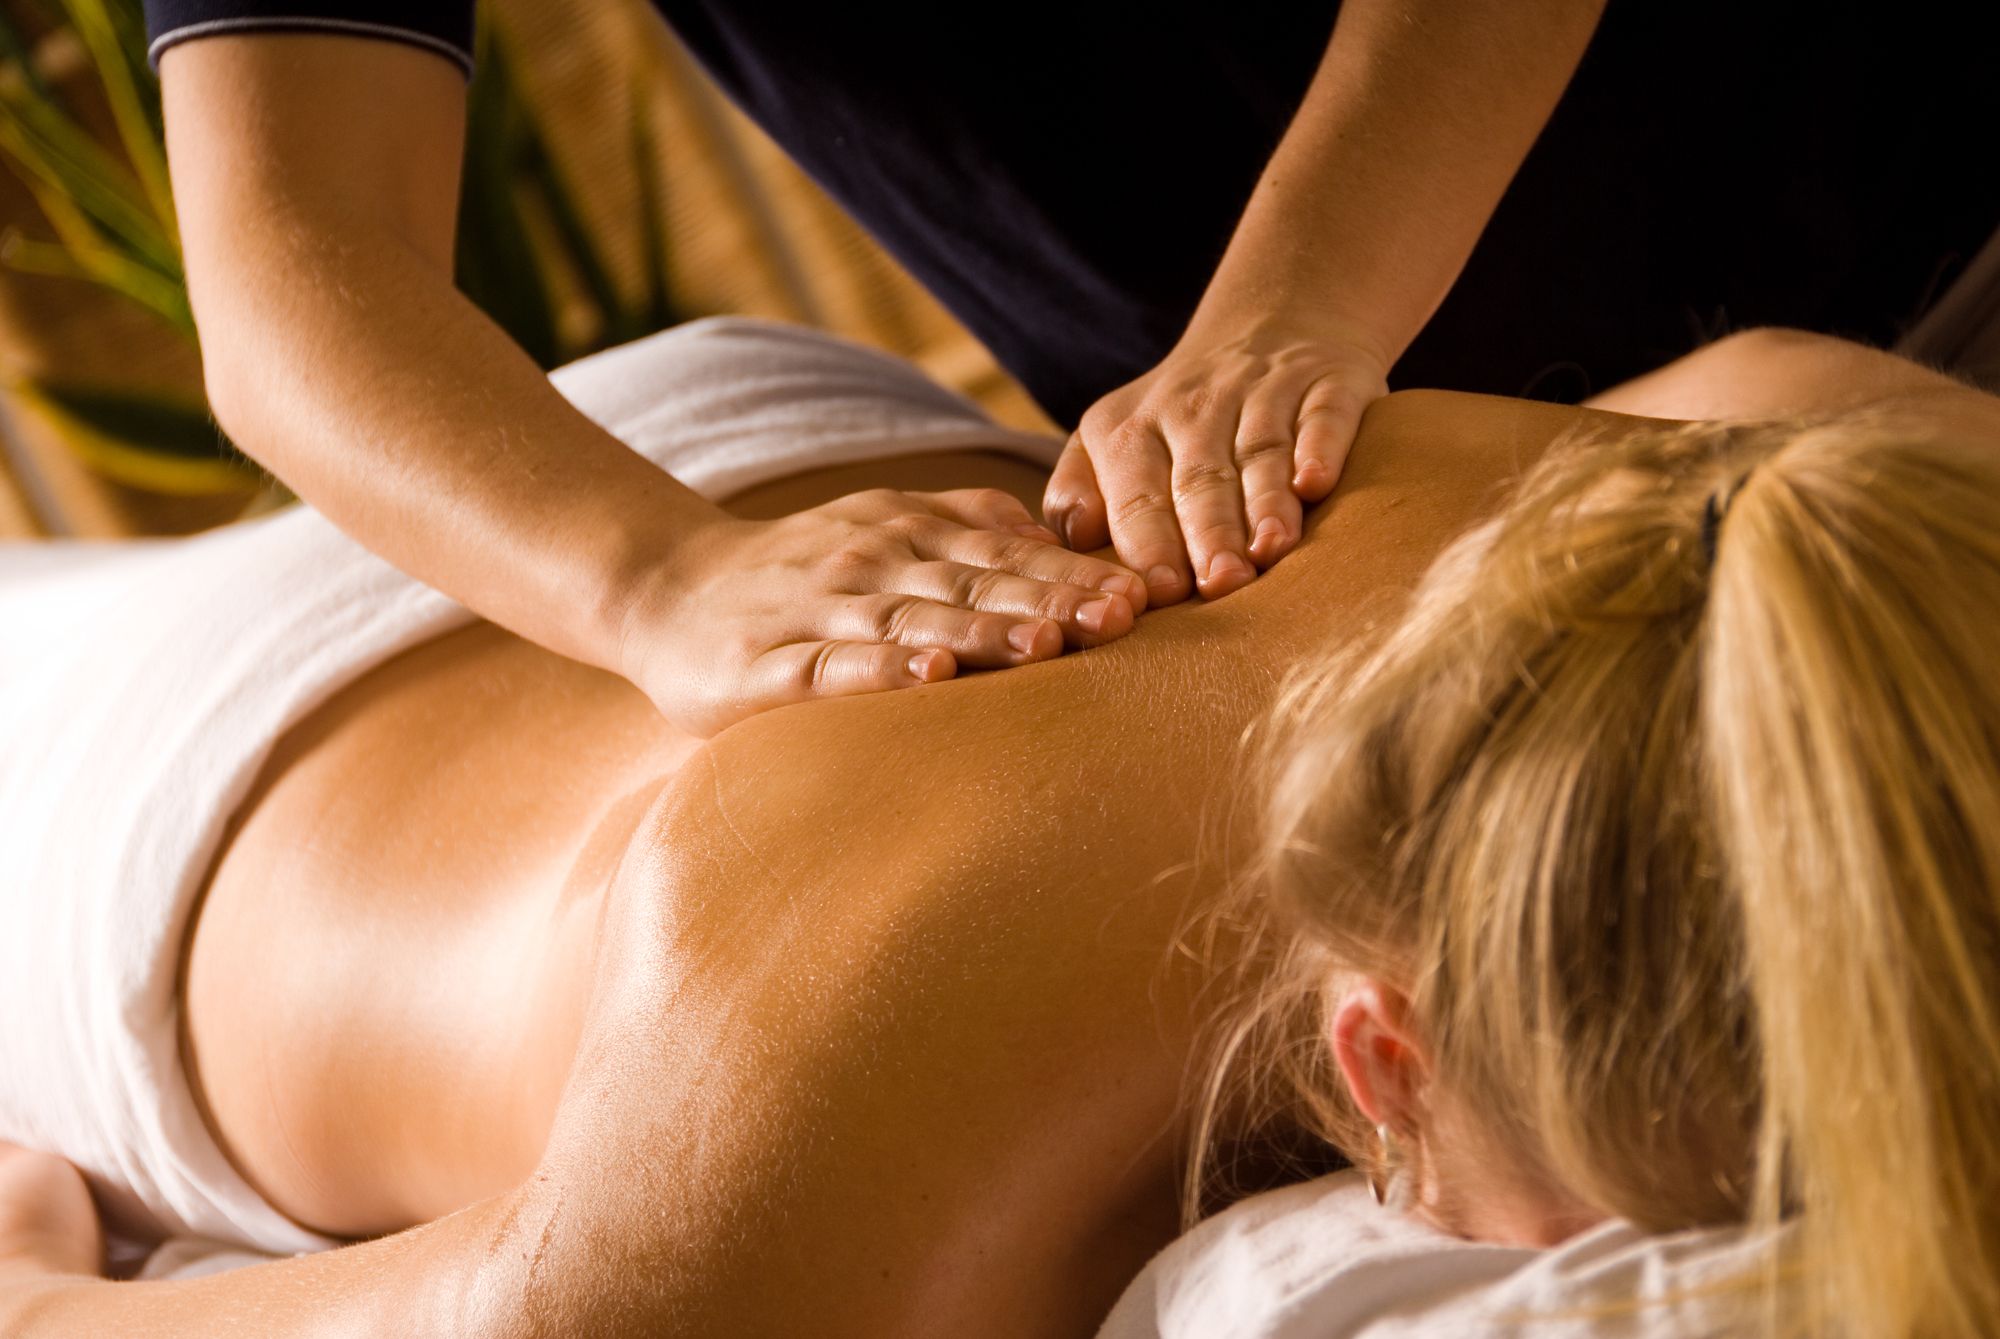 woman at a day spa getting a back massage